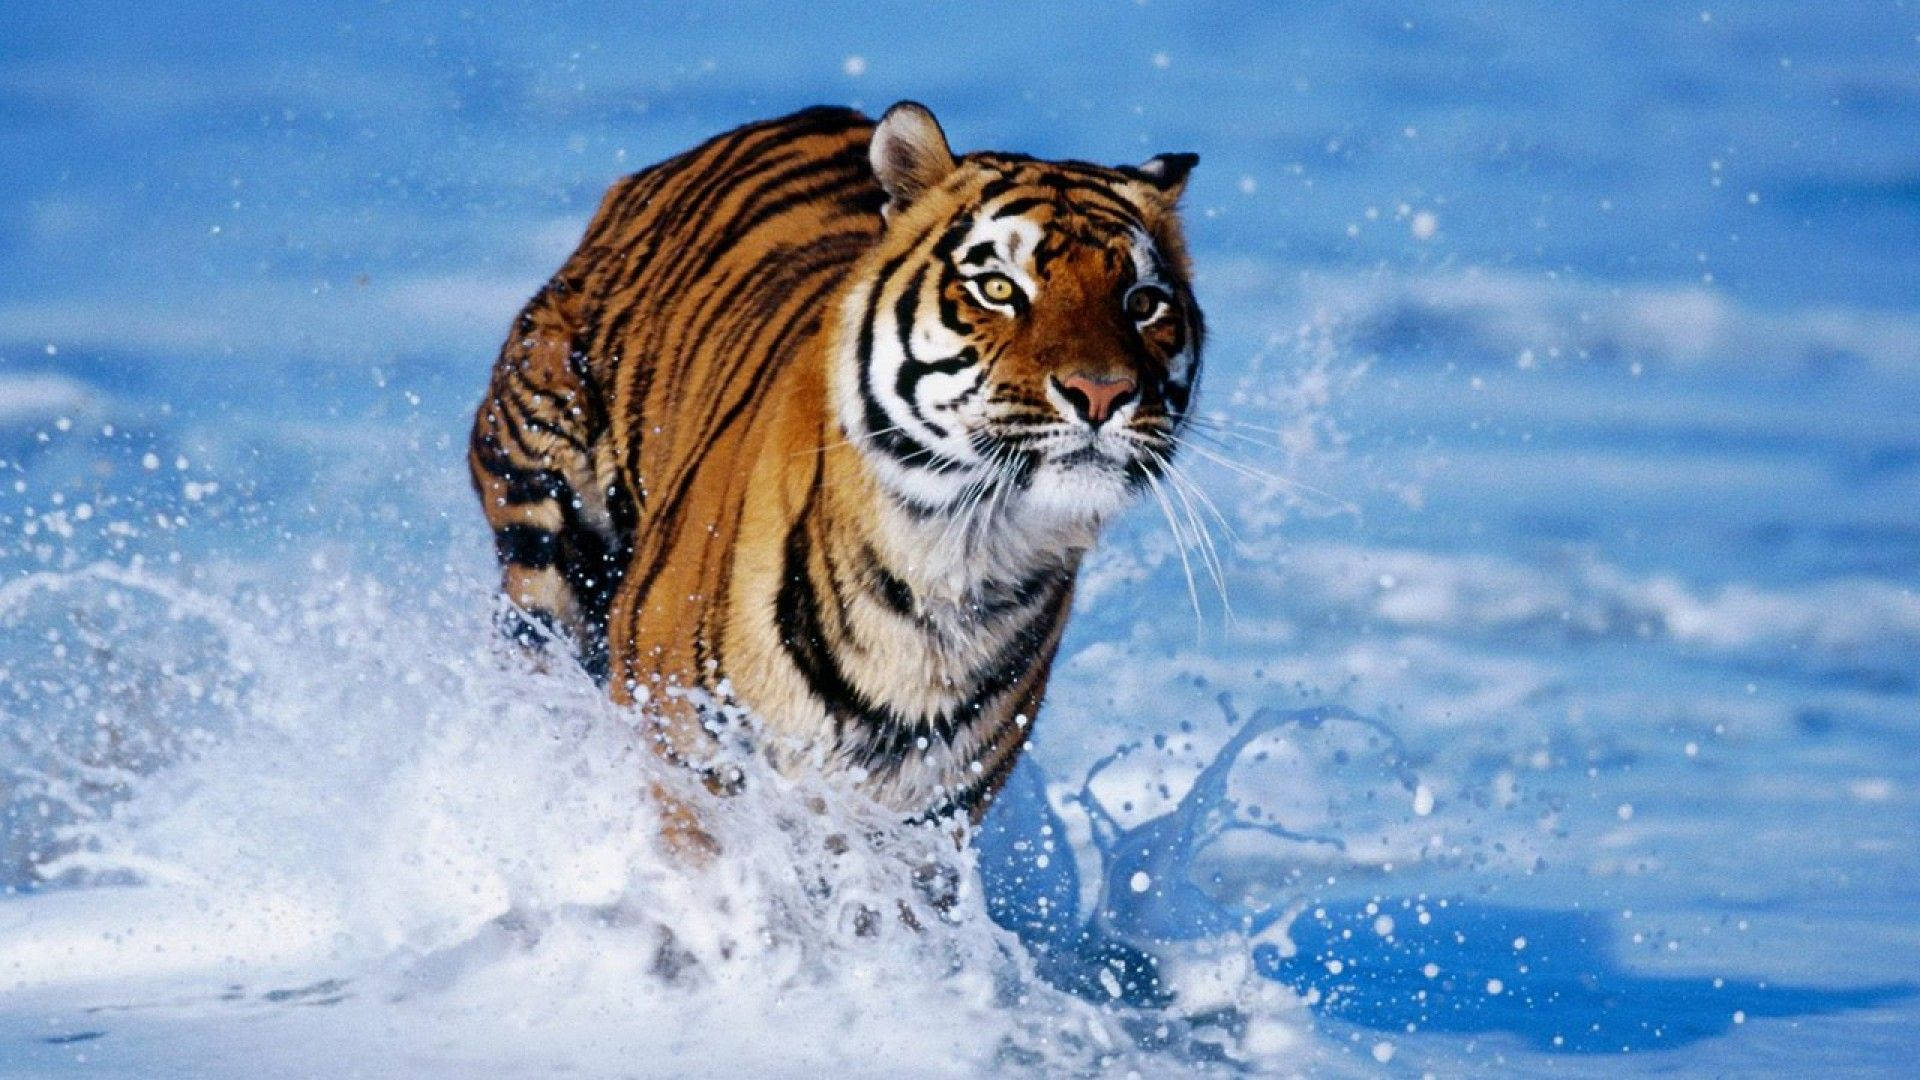 A majestic Tiger running through the water Wallpaper